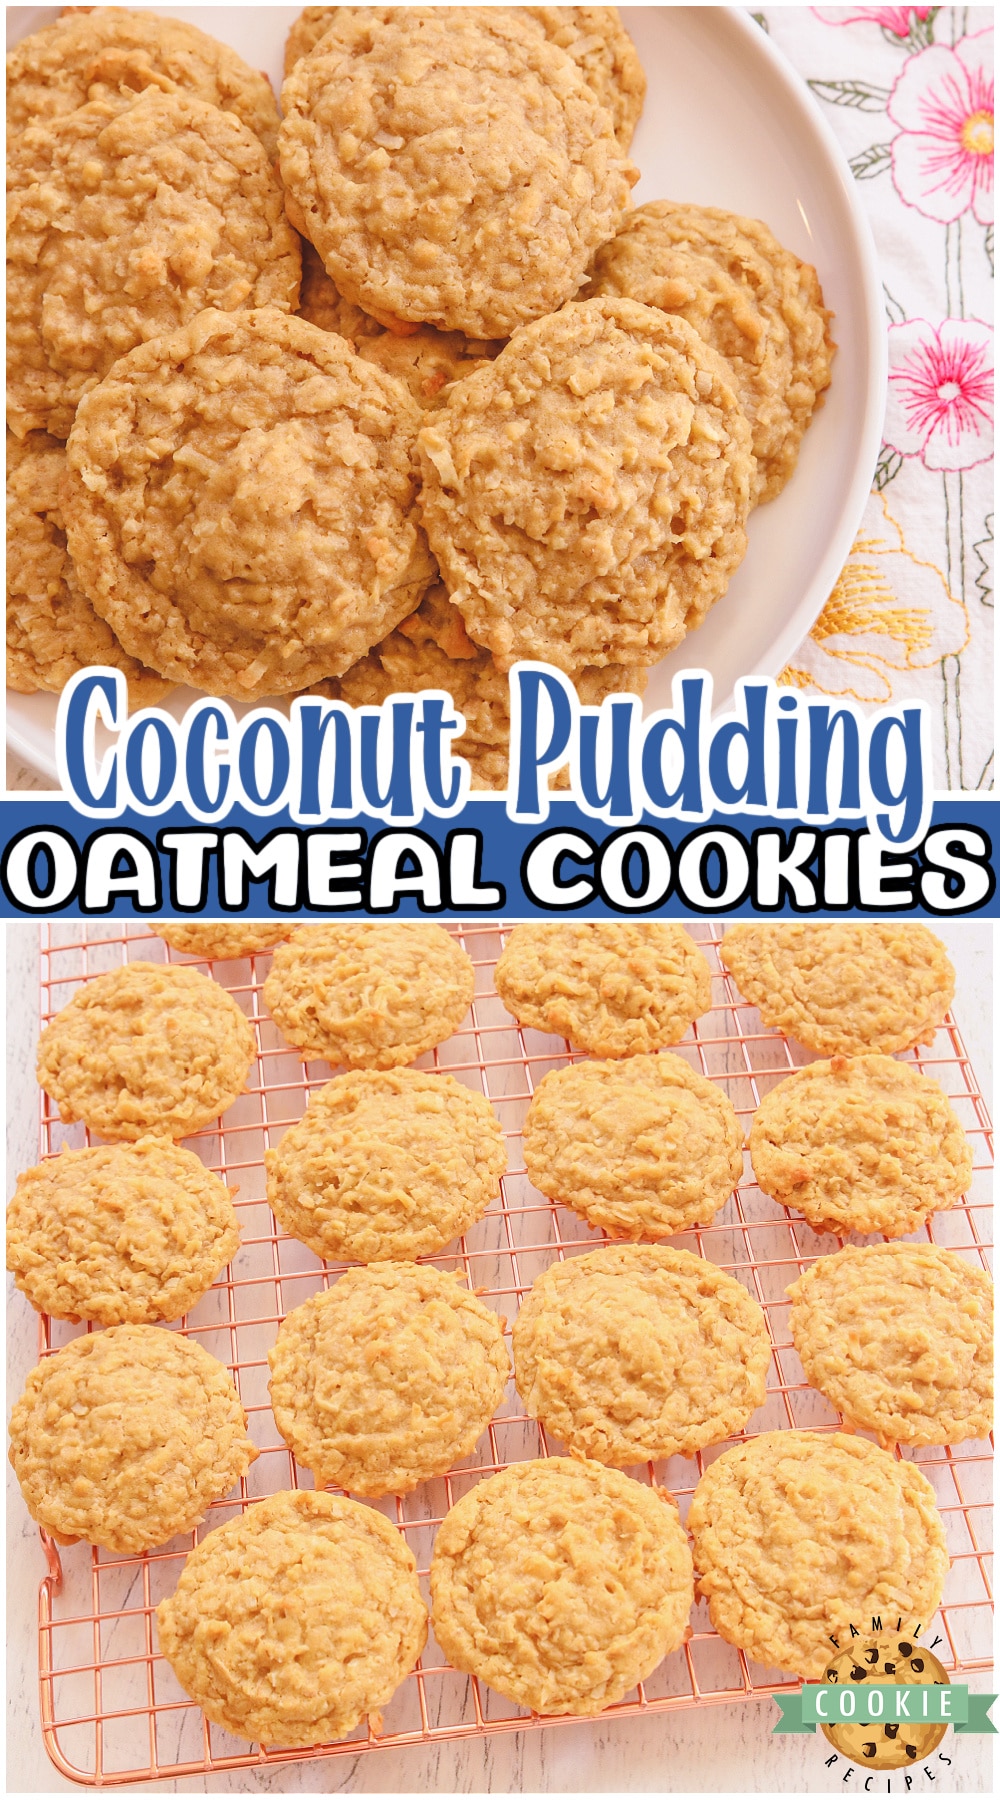 Coconut Oatmeal Cookies are soft & chewy oatmeal cookies with fantastic coconut flavor! Classic ingredients make up this delightful twist on oatmeal cookies.